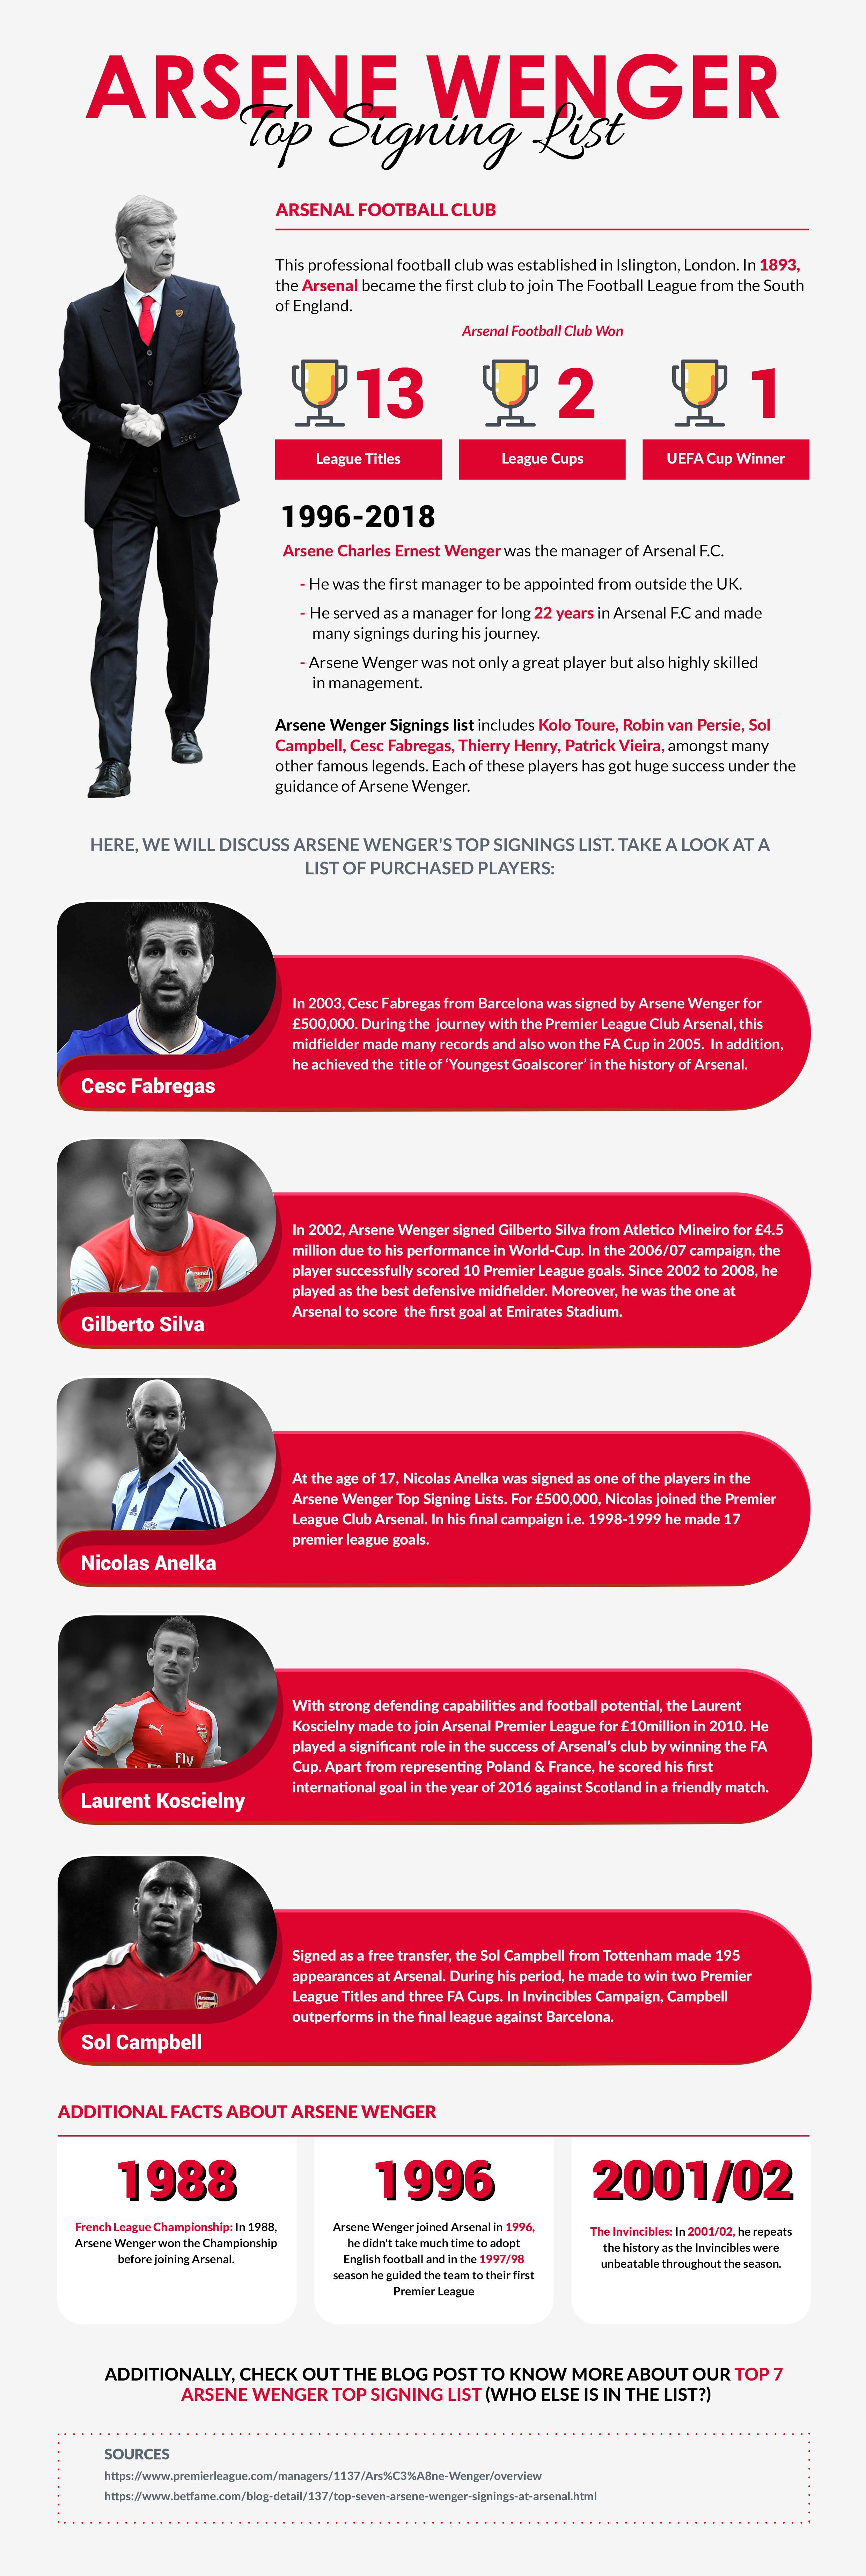 Top Manager Arsene Wenger Top Seven Signings In Arsenal Infographic